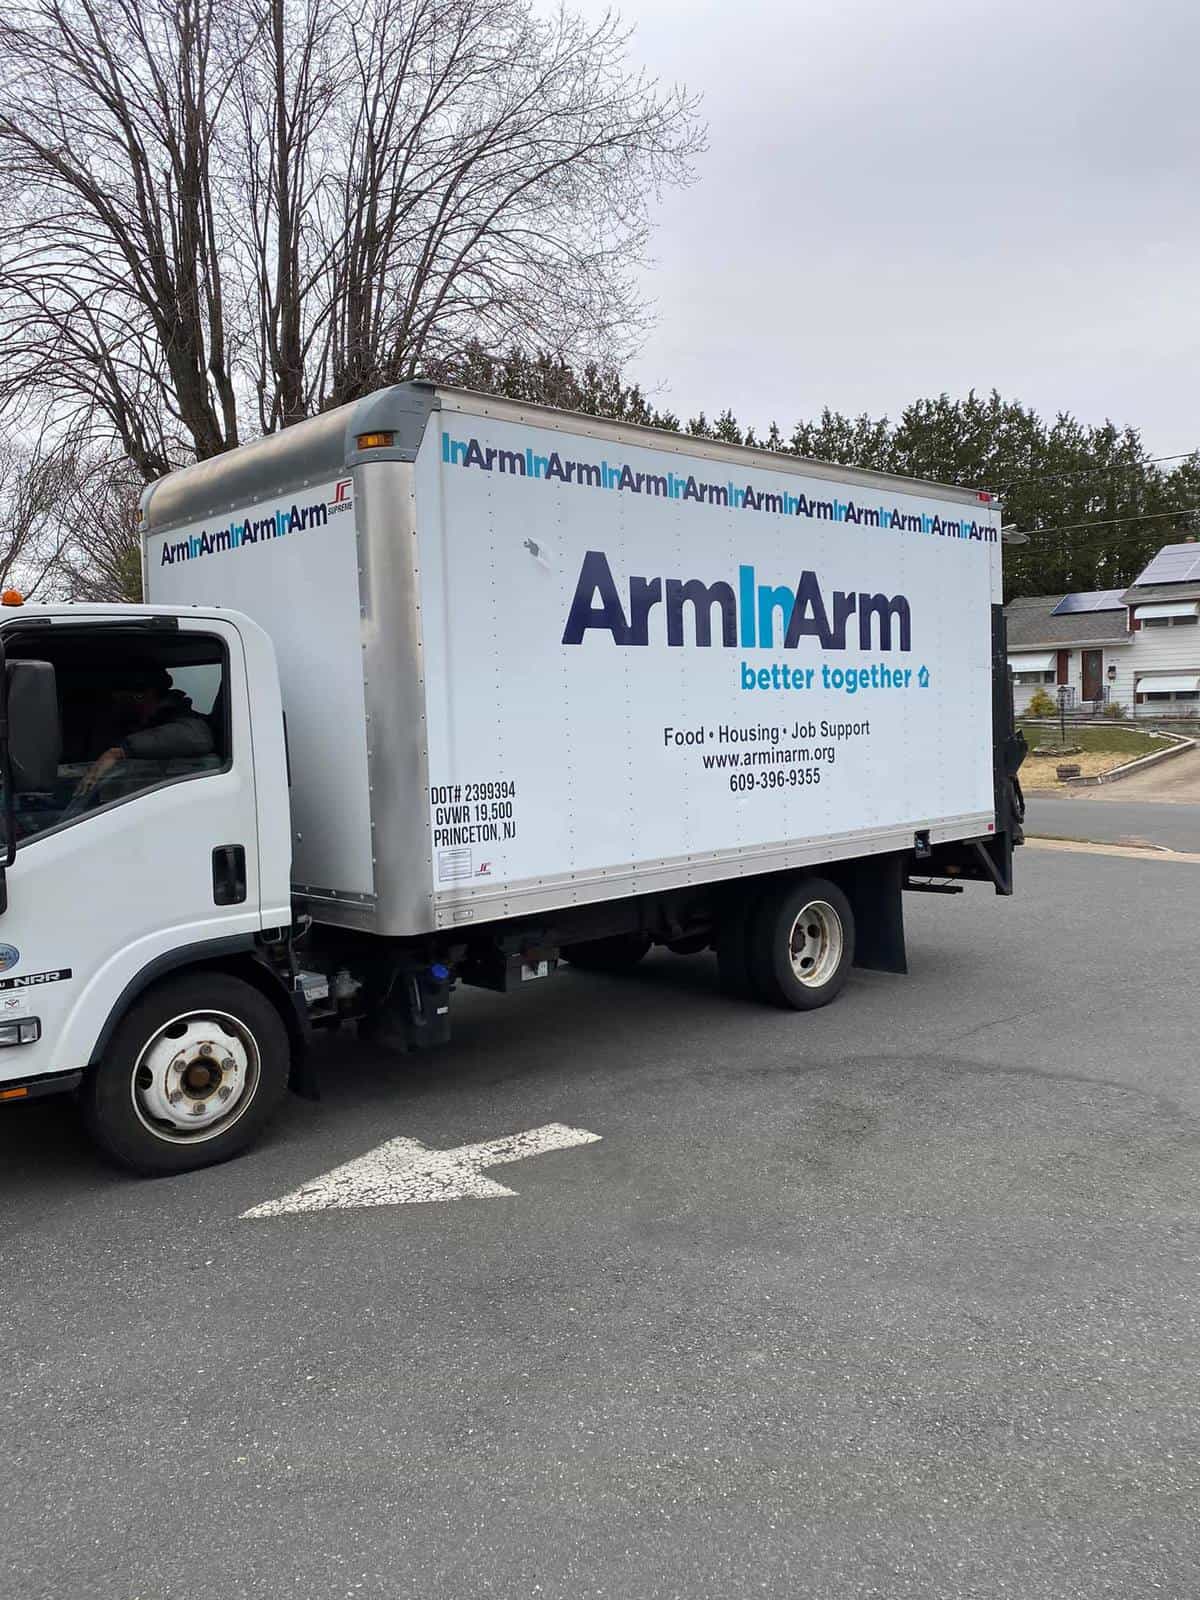 Arm In Arm seeks volunteers to serve local food-insecure residents at pantries, distribution center, mobile pantry